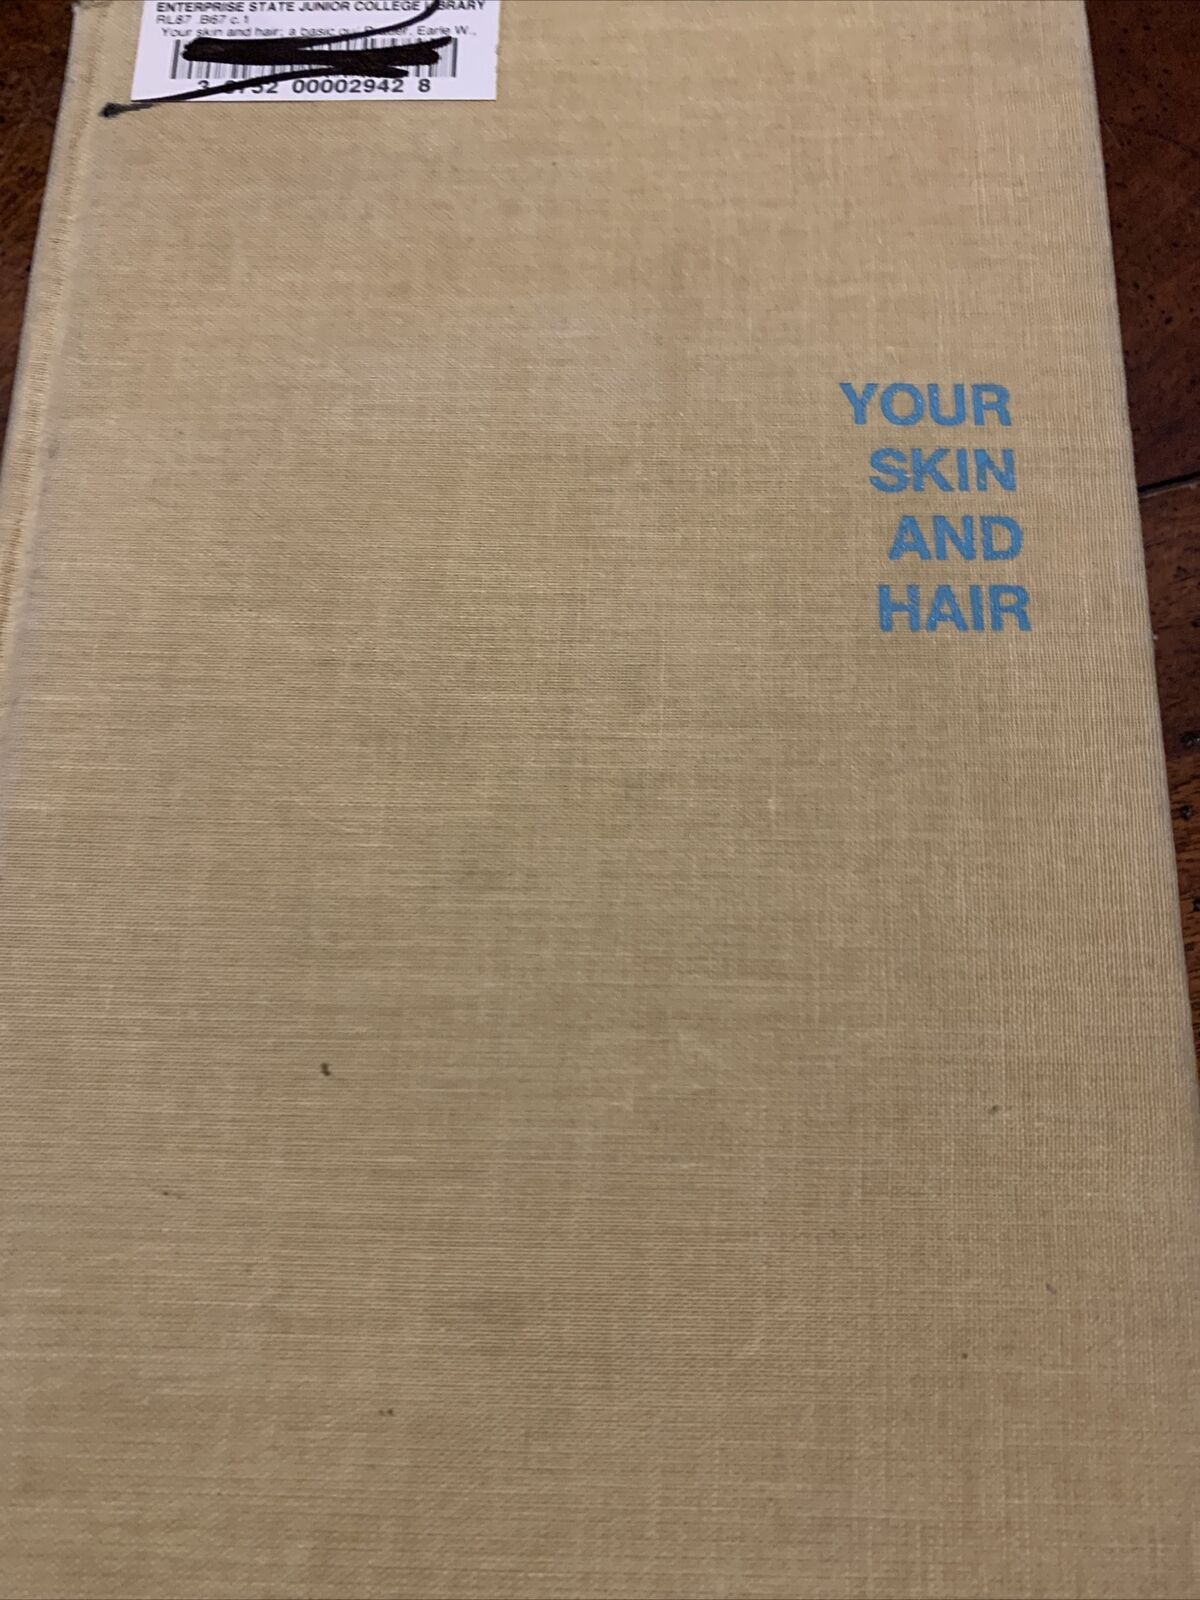 Your Skin And Hair Earle W Brauer M.D. A Basic Guide To Care And Beauty 1970